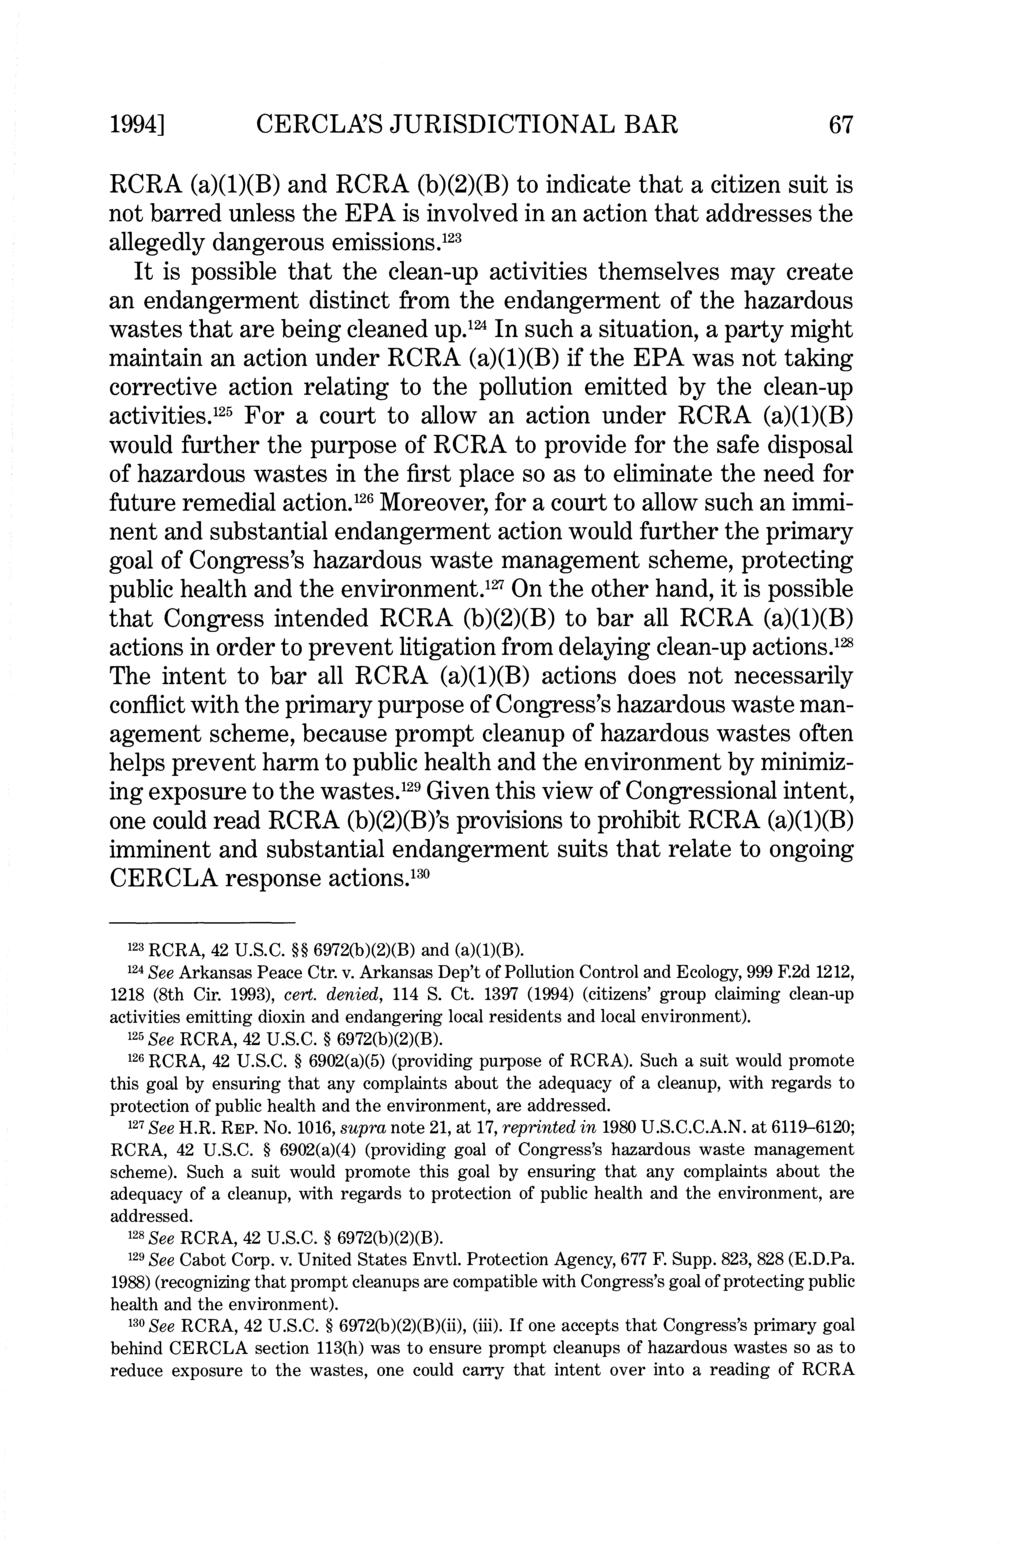 1994] CERCLNS JURISDICTIONAL BAR 67 RCRA (a)(1)(b) and RCRA (b)(2)(b) to indicate that a citizen suit is not barred unless the EPA is involved in an action that addresses the allegedly dangerous